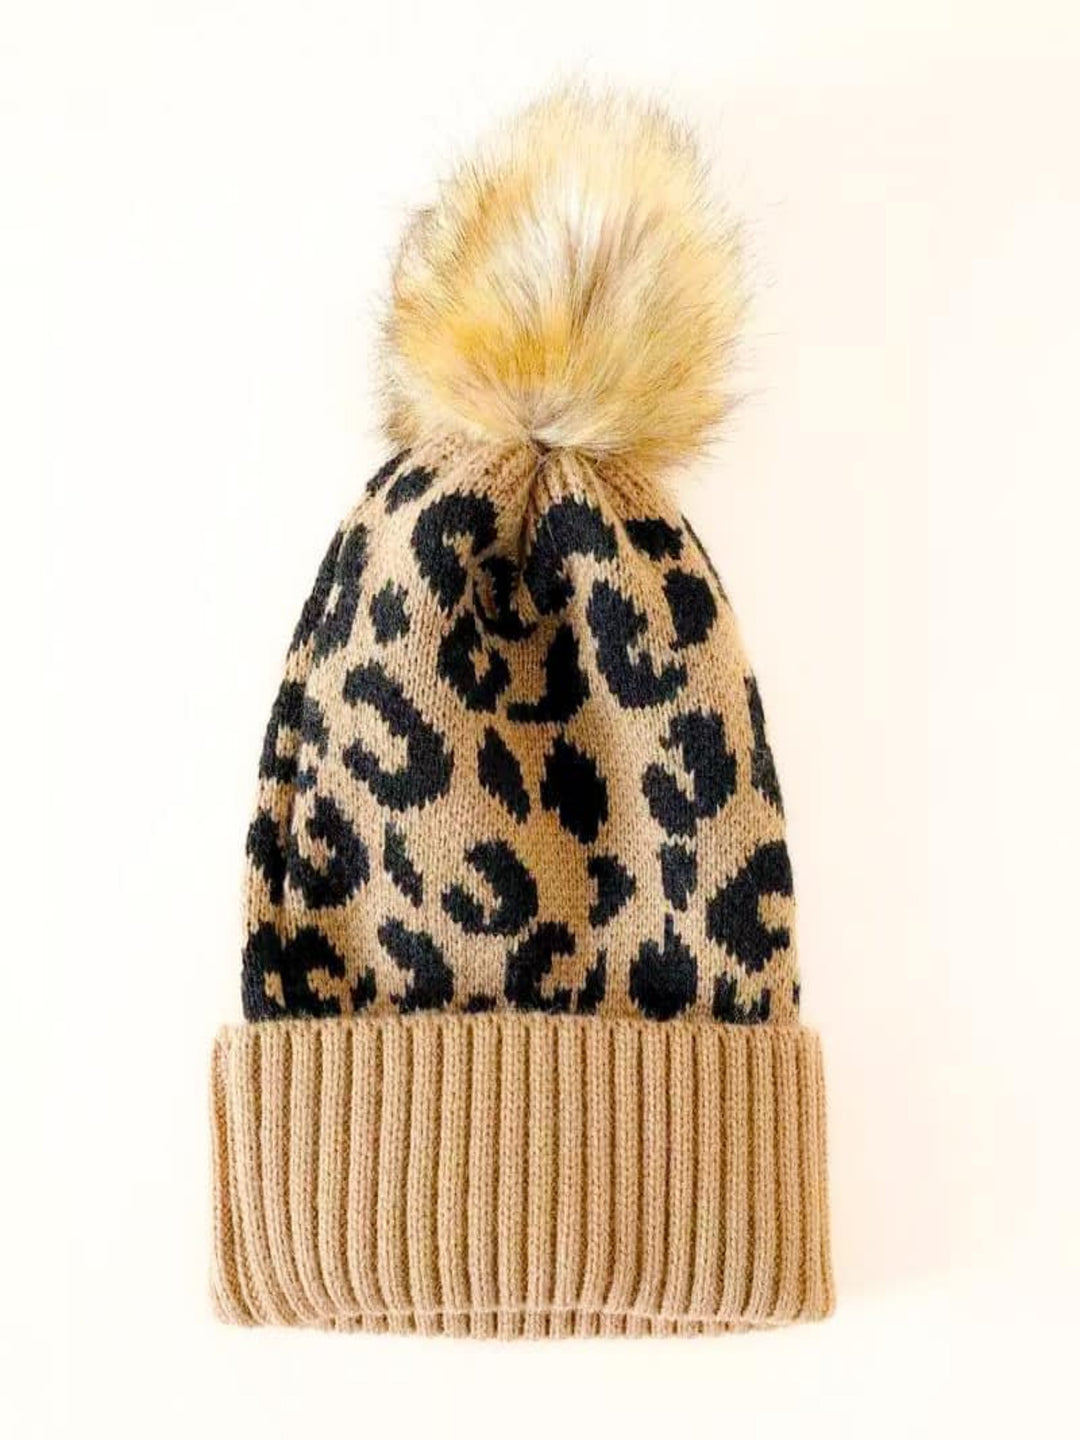 The Lala Knit Animal Print Cuff Beanie with Faux Fur Pom Detail in Tan